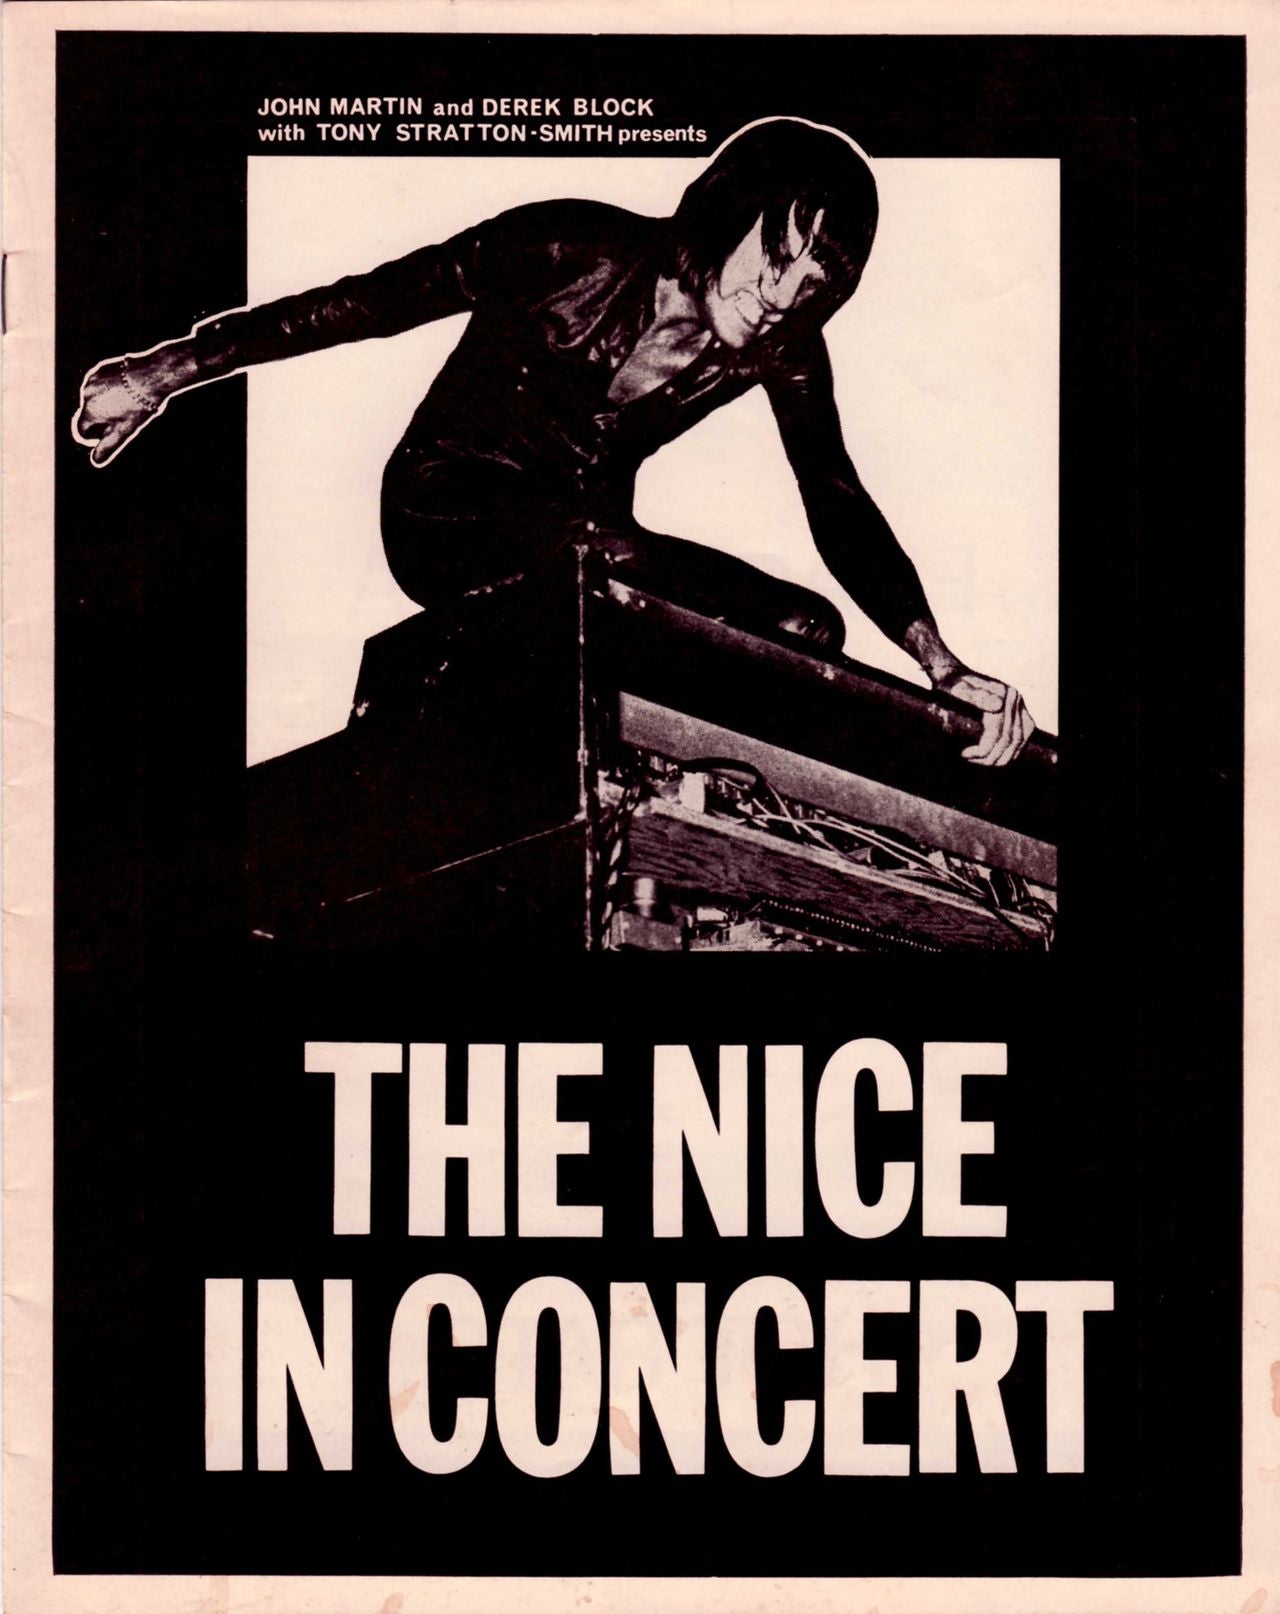 The Nice The Nice In Concert + Ticket Stub UK tour programme CONCERT PROGRAMME